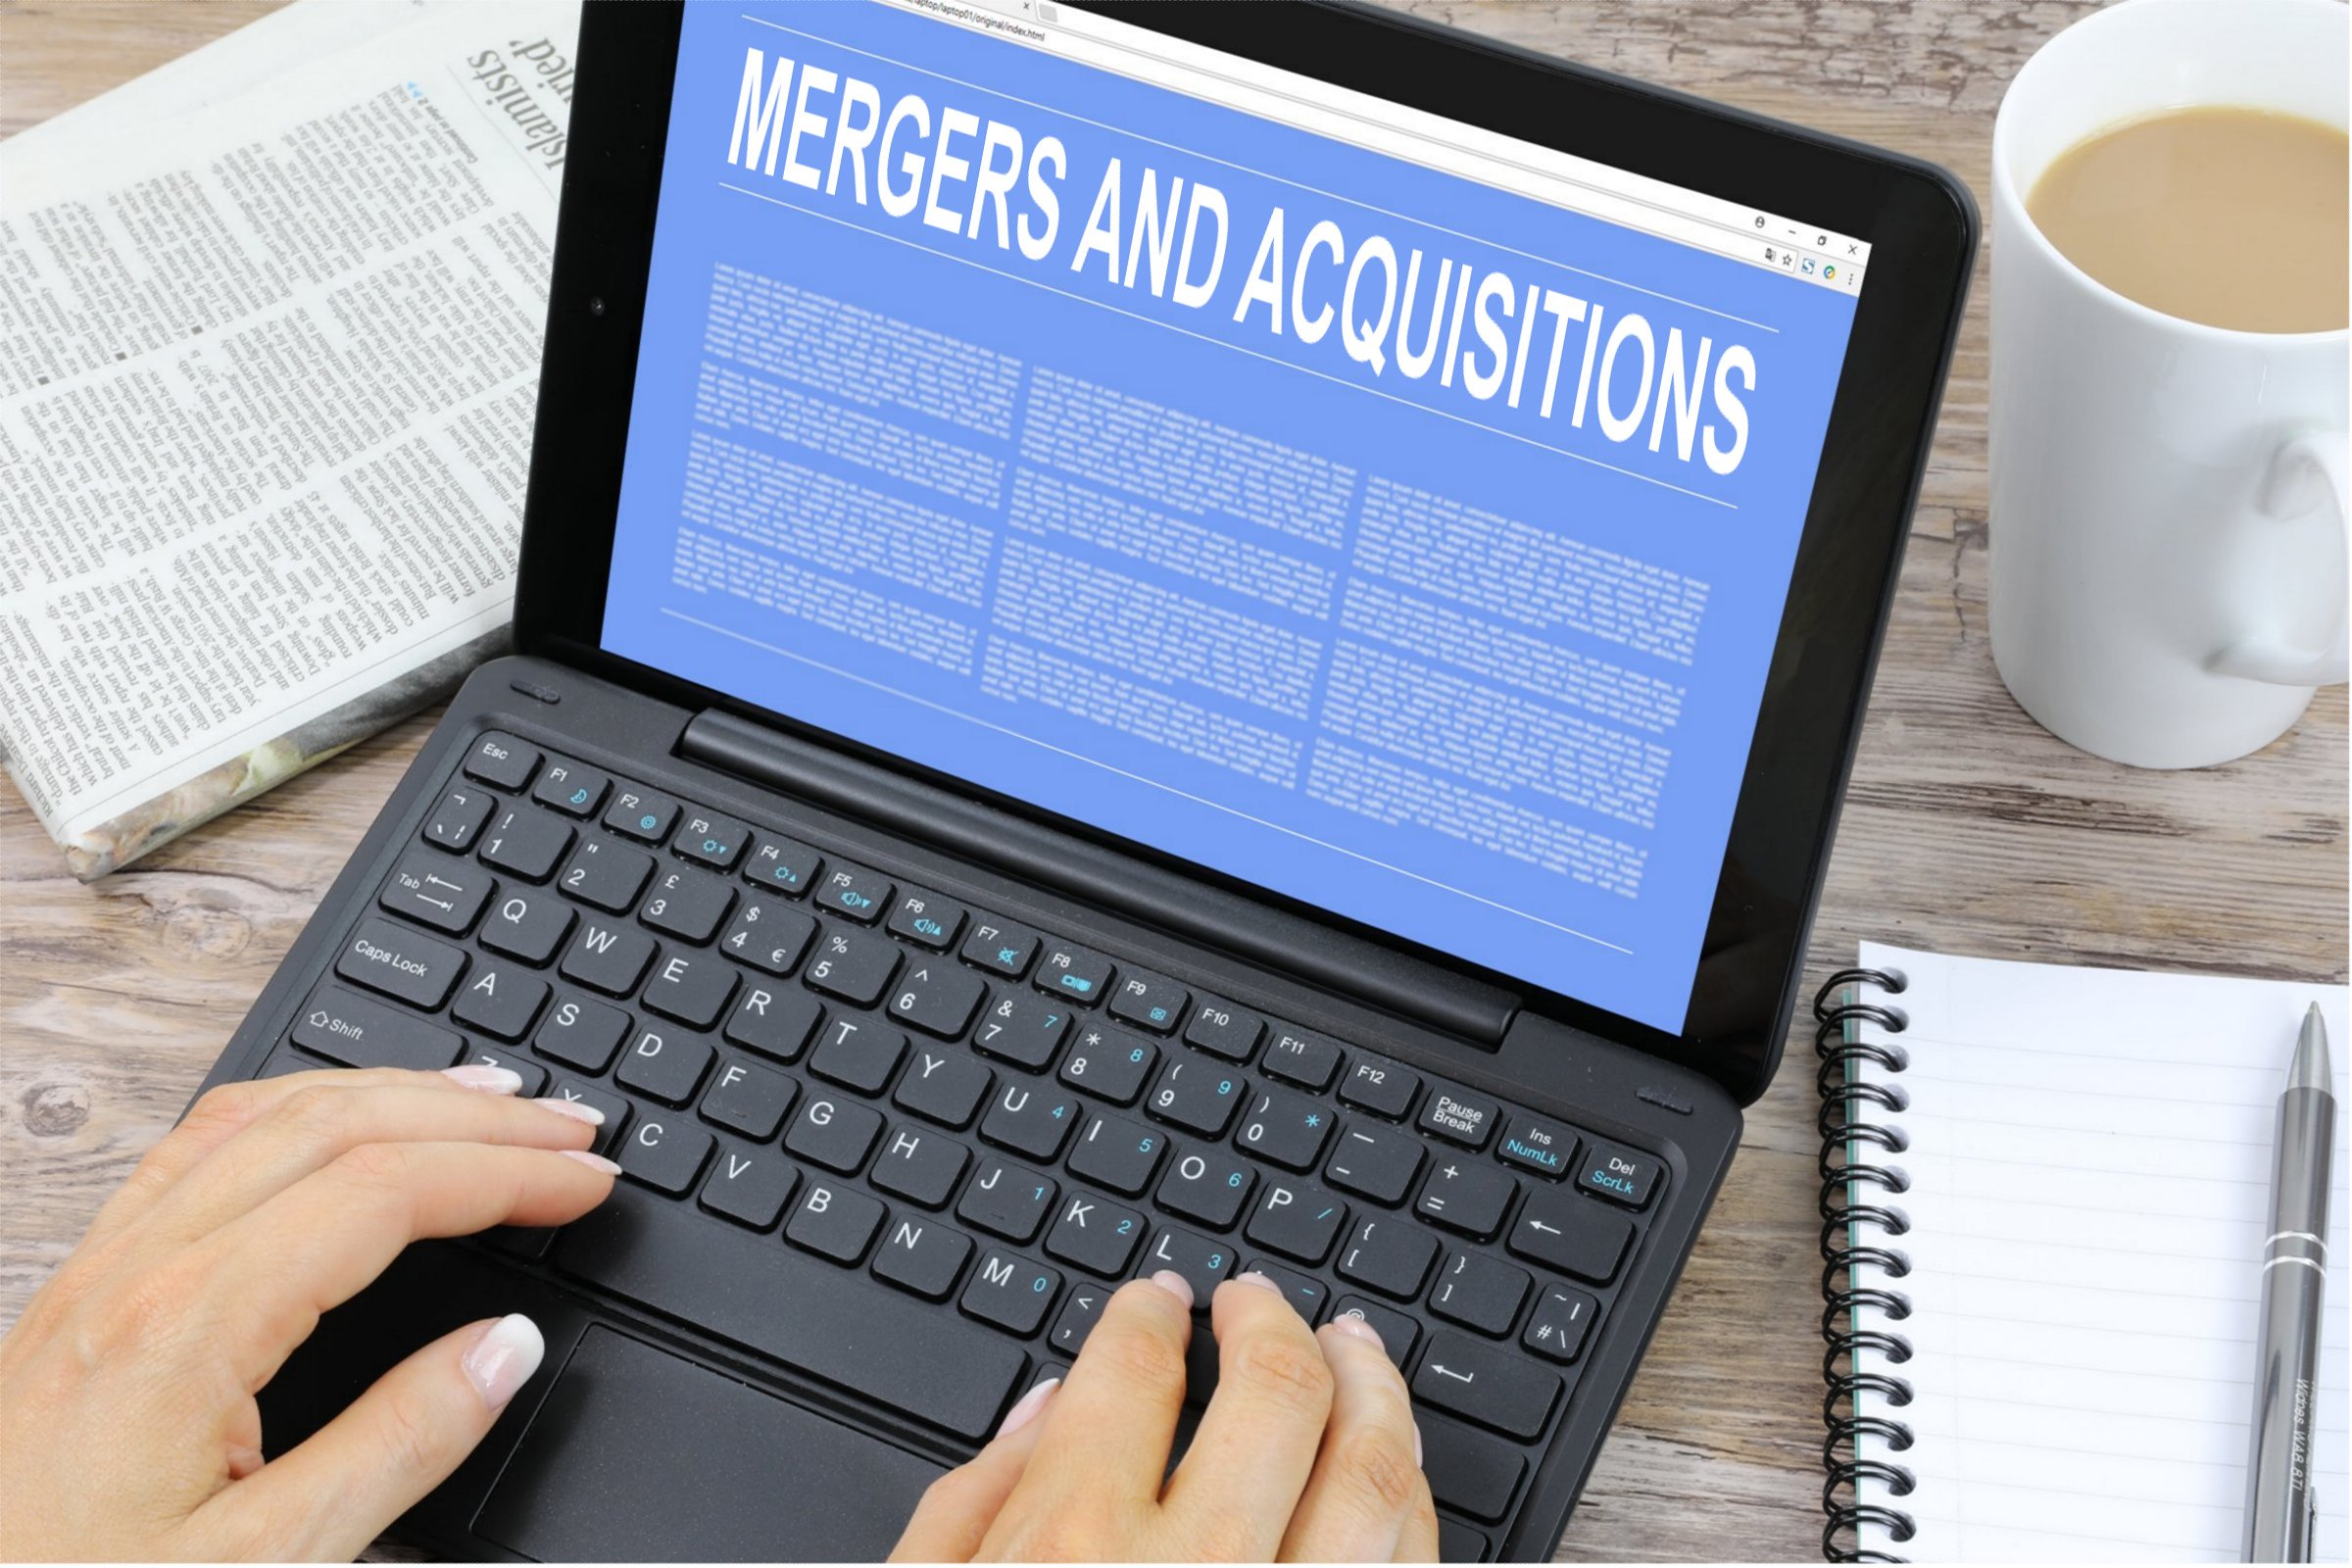 free-of-charge-creative-commons-mergers-and-acquisitions-image-laptop-1